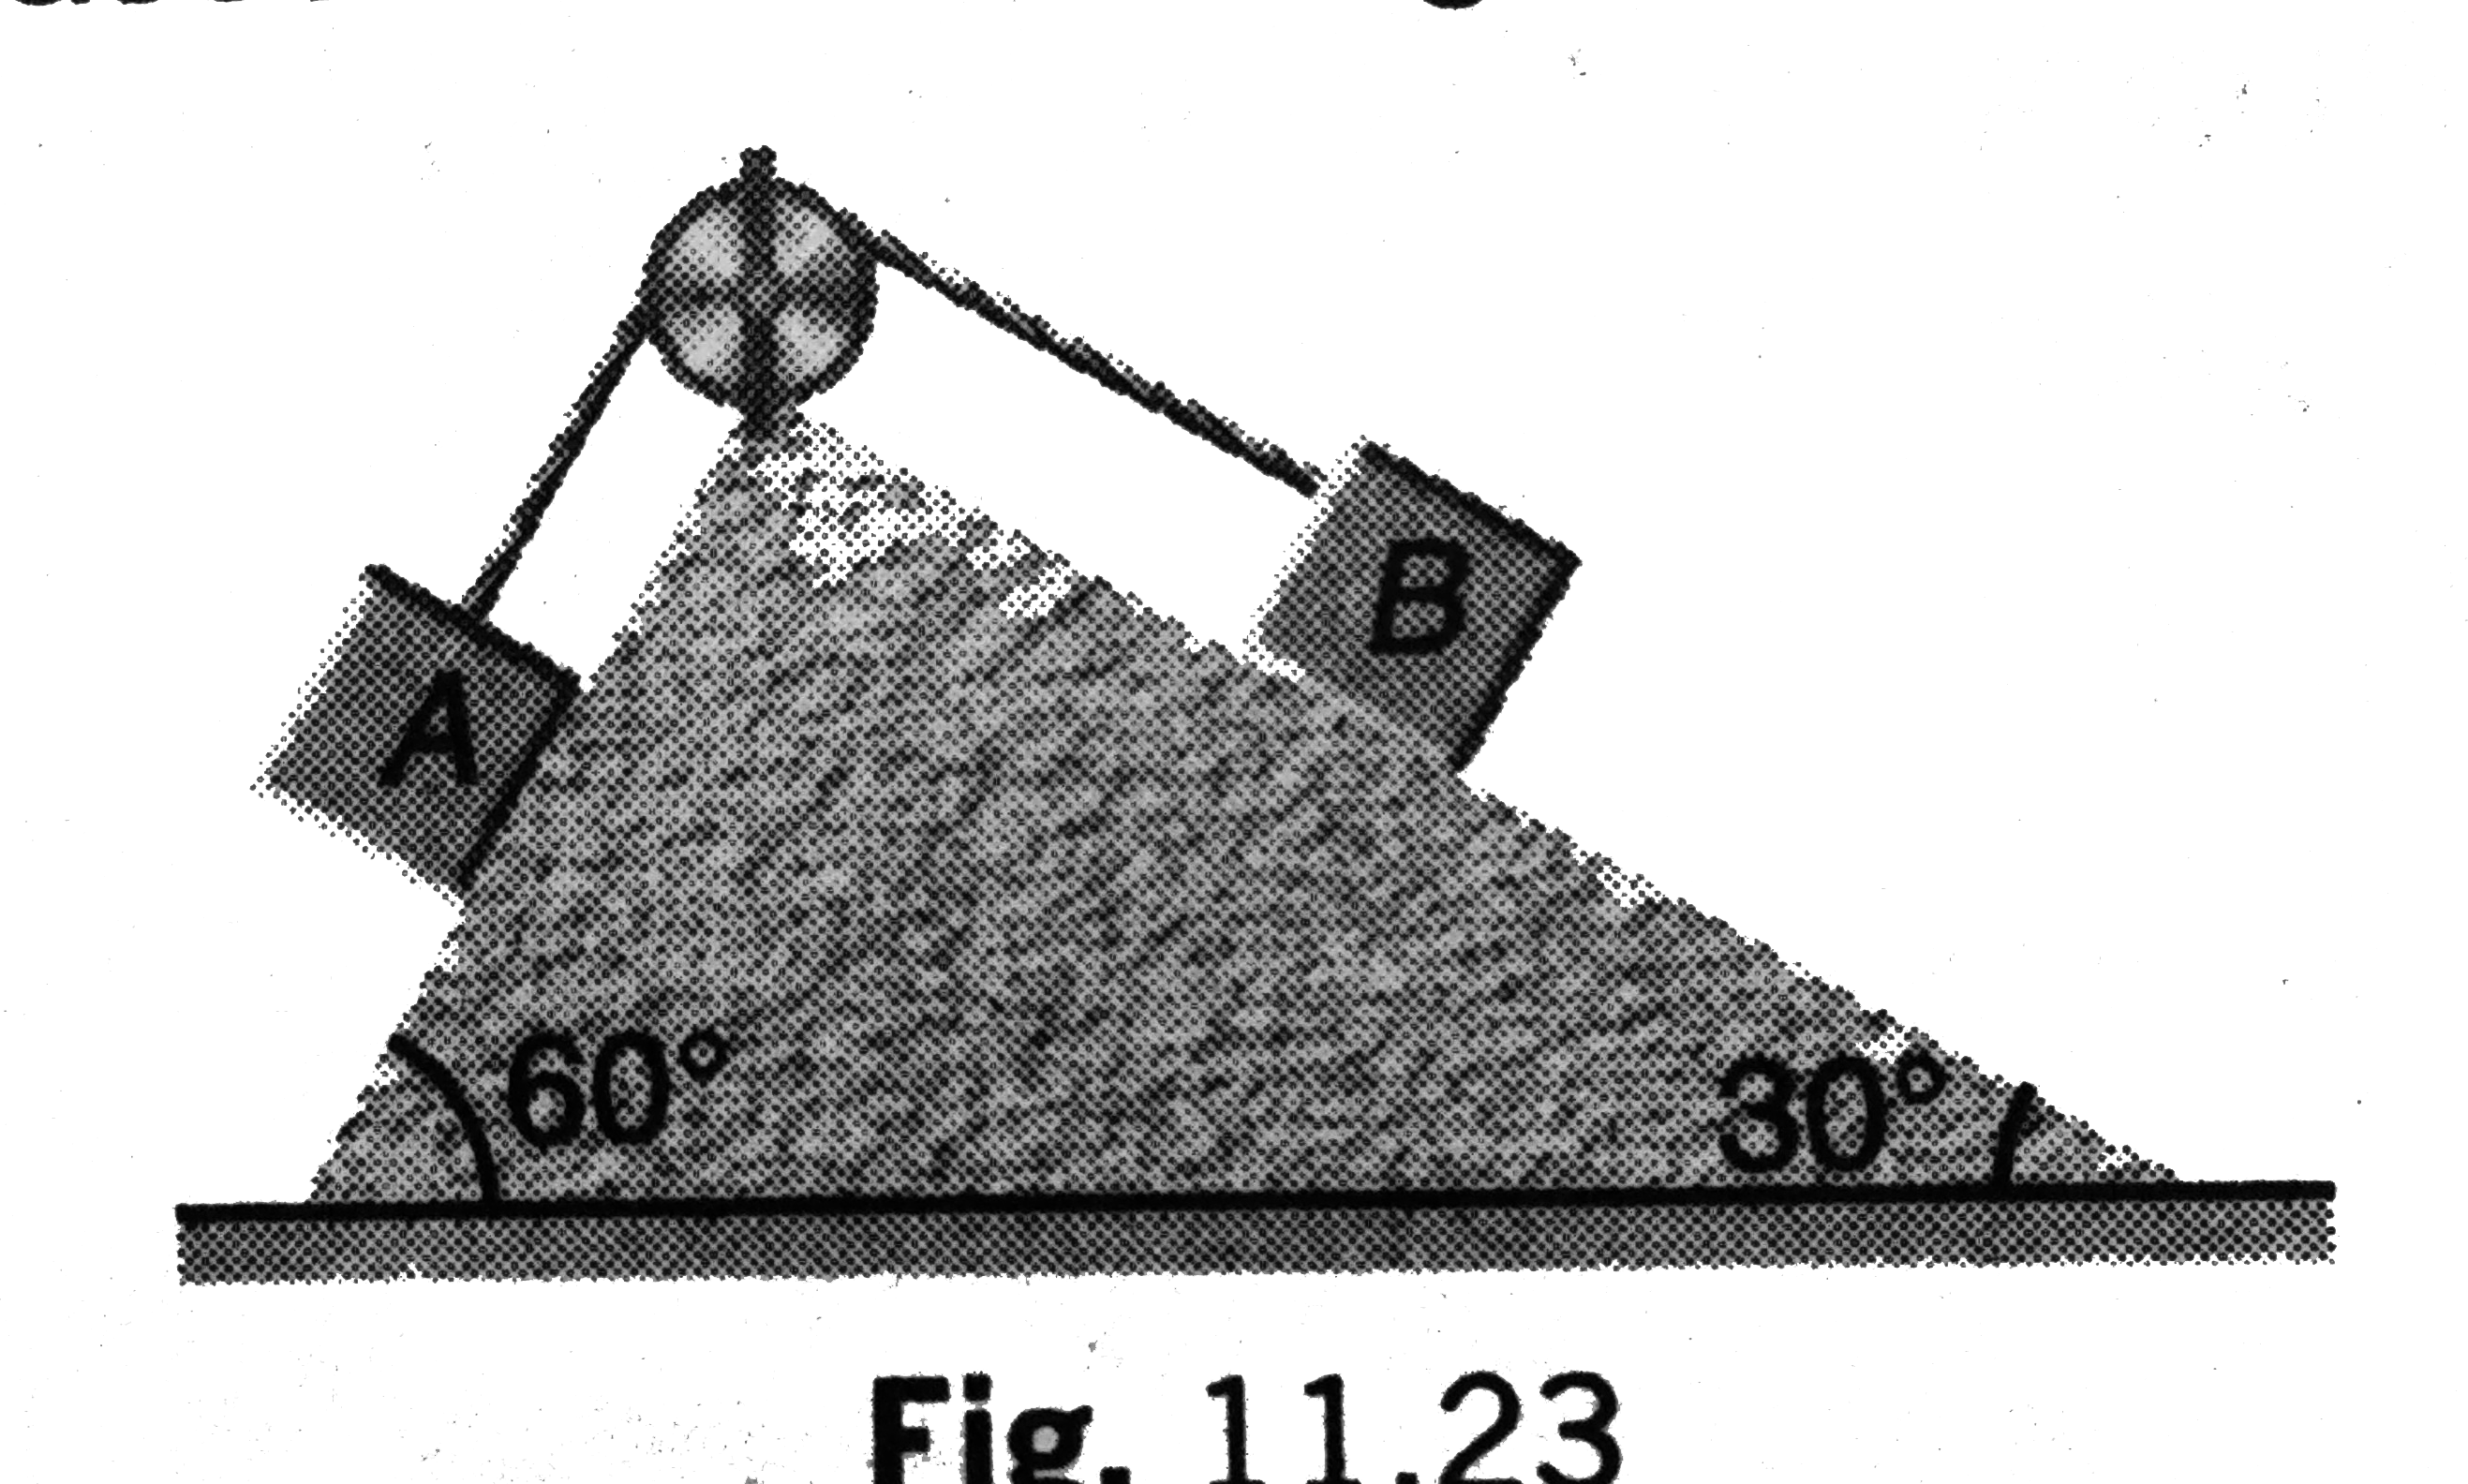 Two blocks A and B of equal masses are attached to a string passing over a smooth pulley fixed to a wedge as shown in figure. Find the magnitude of acceleration of centre of mass of the two blocks when they are released from rest. Neglect friction.